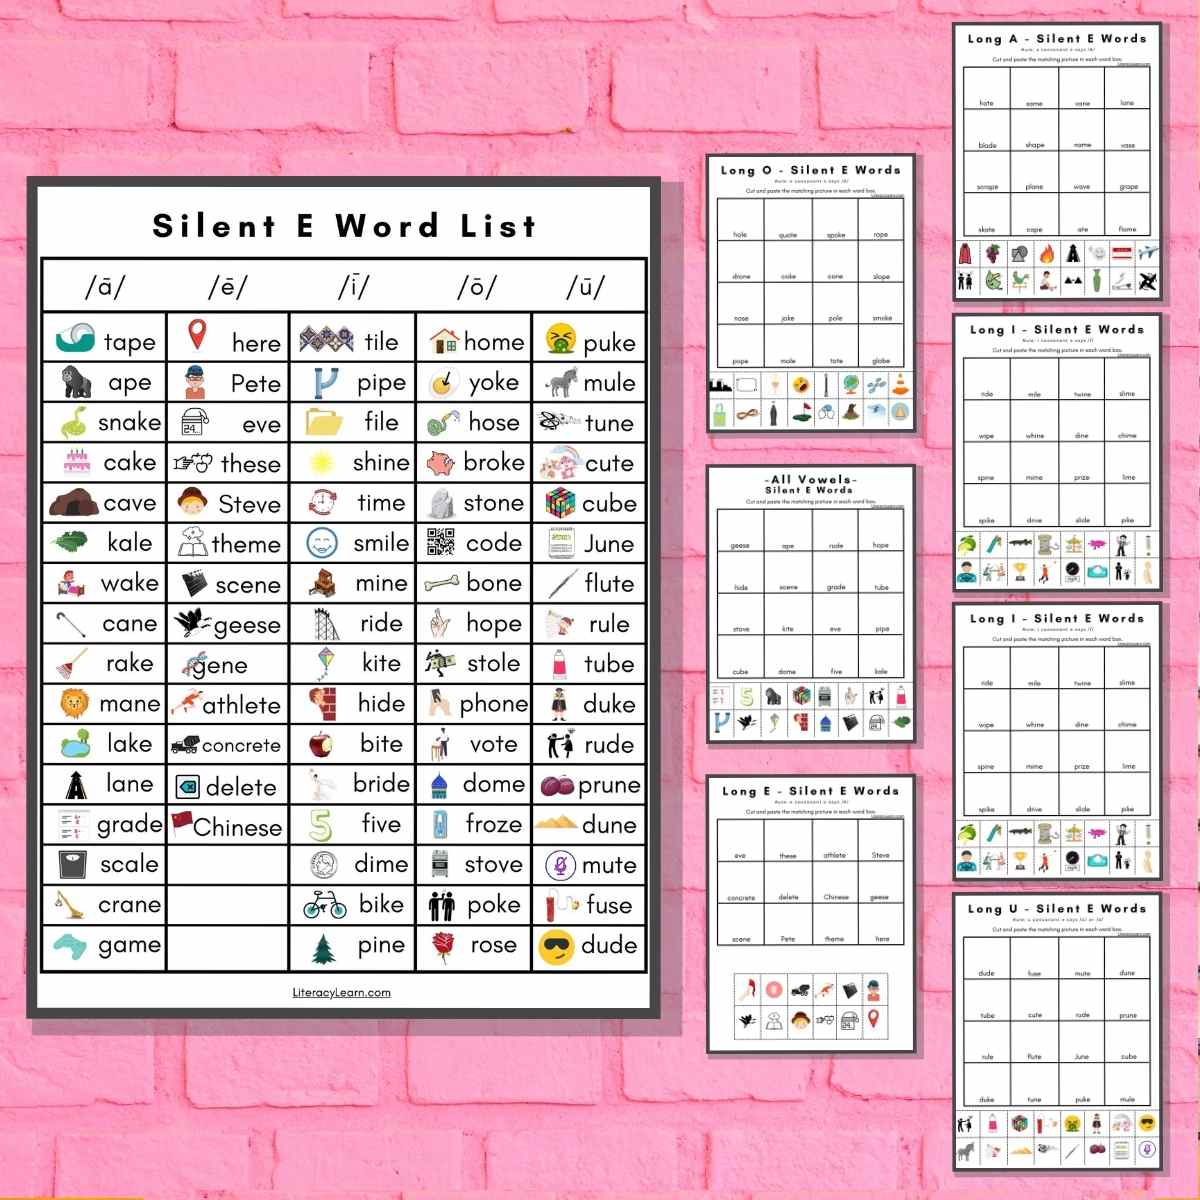 Graphic showing a silent e words list and 7 worksheets on a pink background.